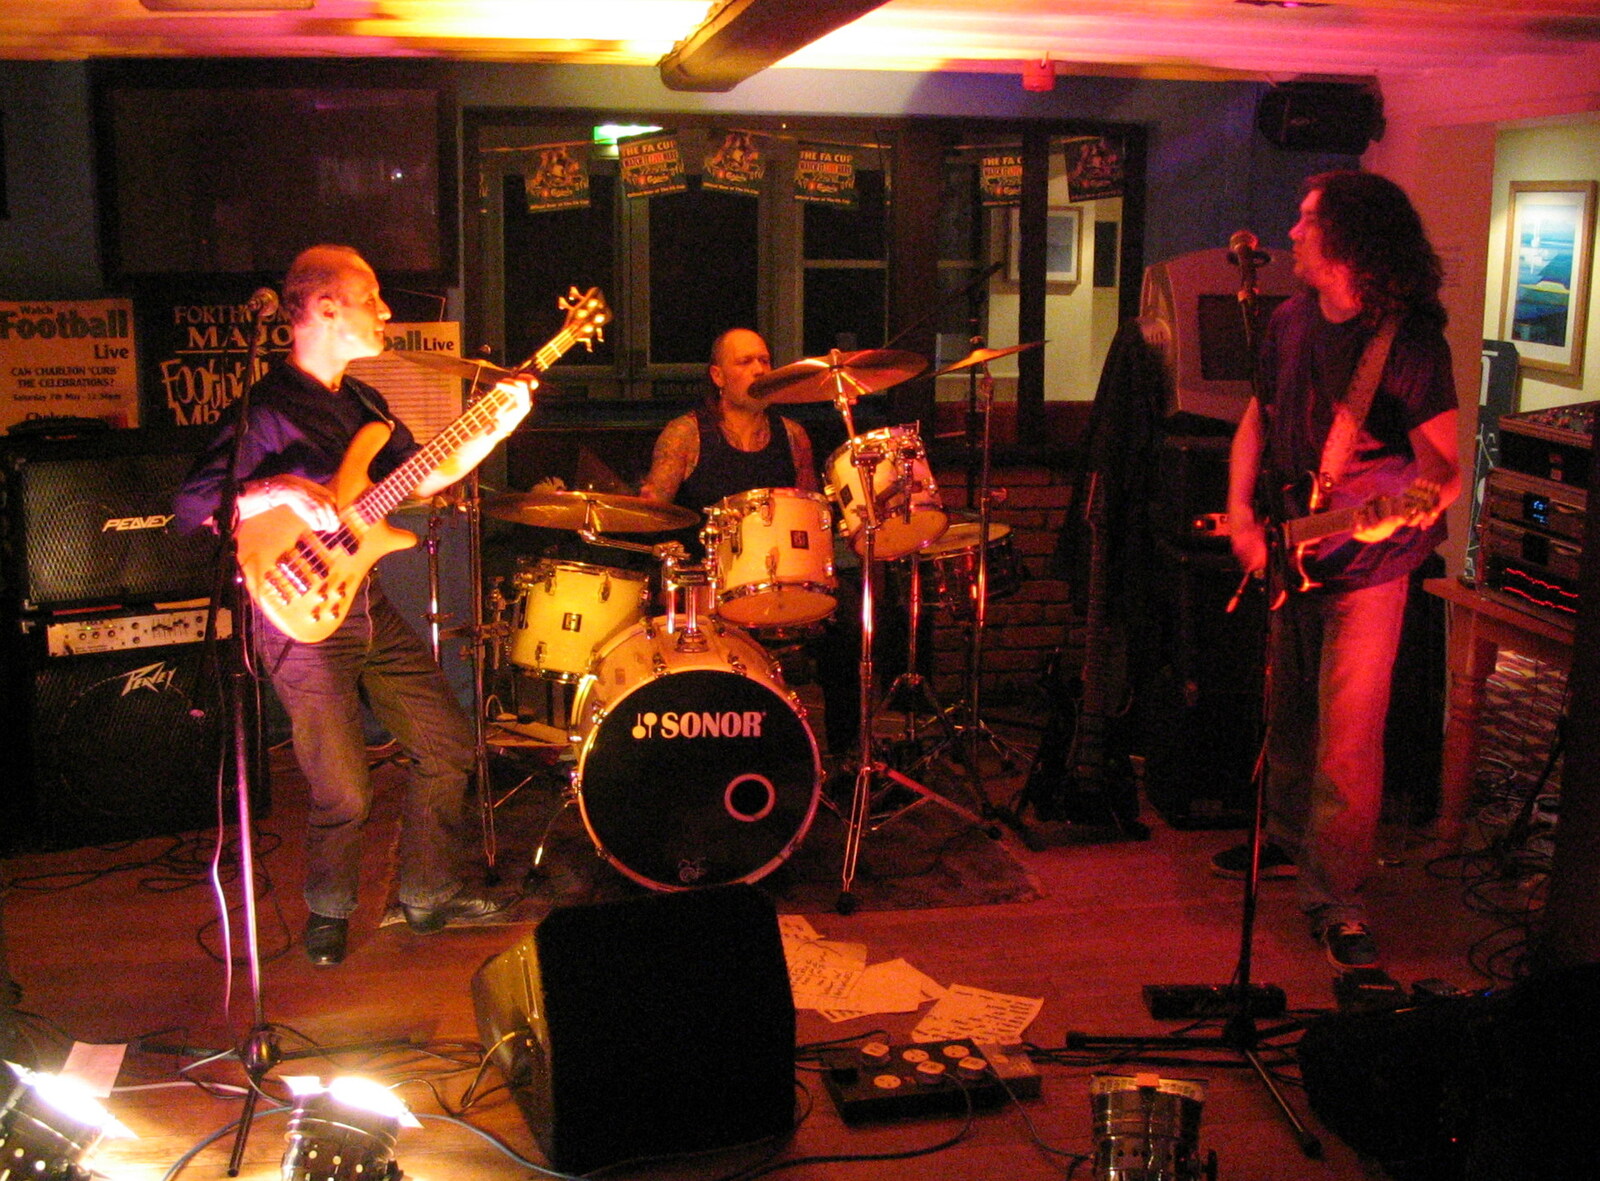 More rock band action in the Waterfront in Diss from Music at the Waterfront and Upstairs at Revolution Records, Diss - 8th May 2005